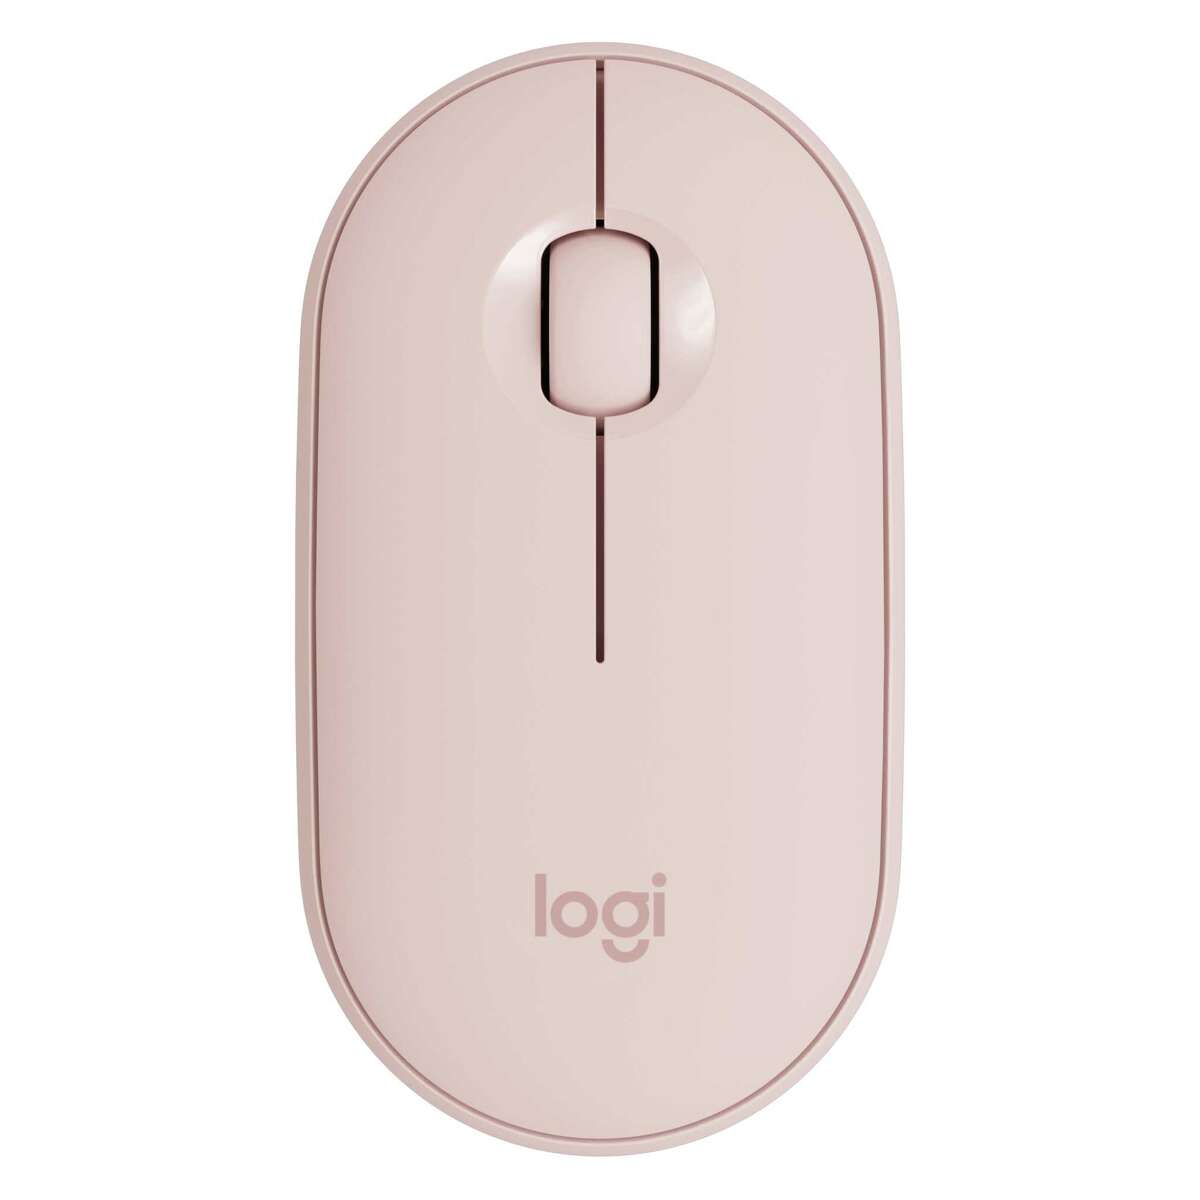 The Logitech Pebble wireless mouse. (Provided)